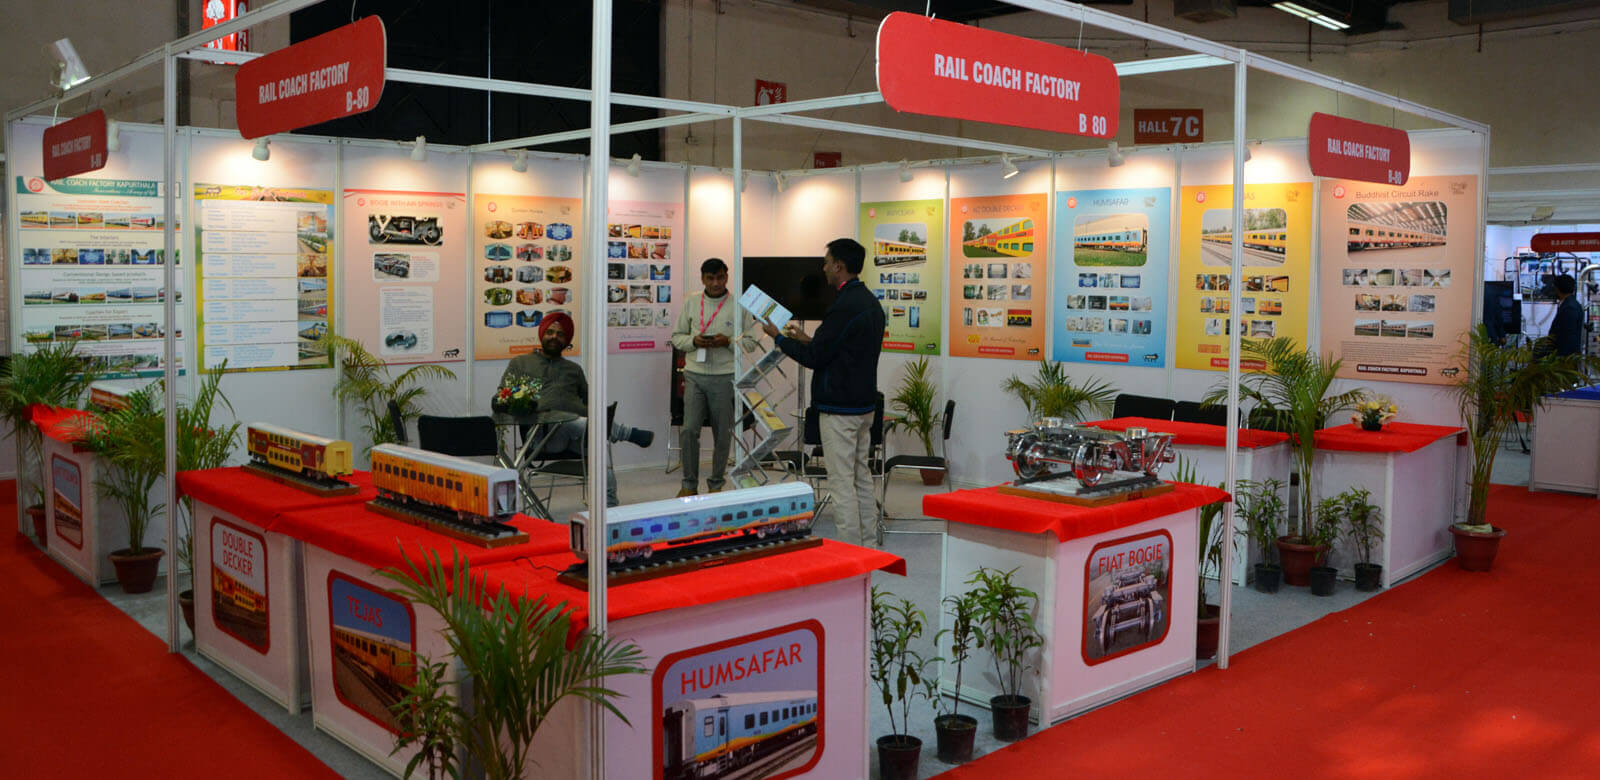 Exhibition Management Company in Delhi NCR India